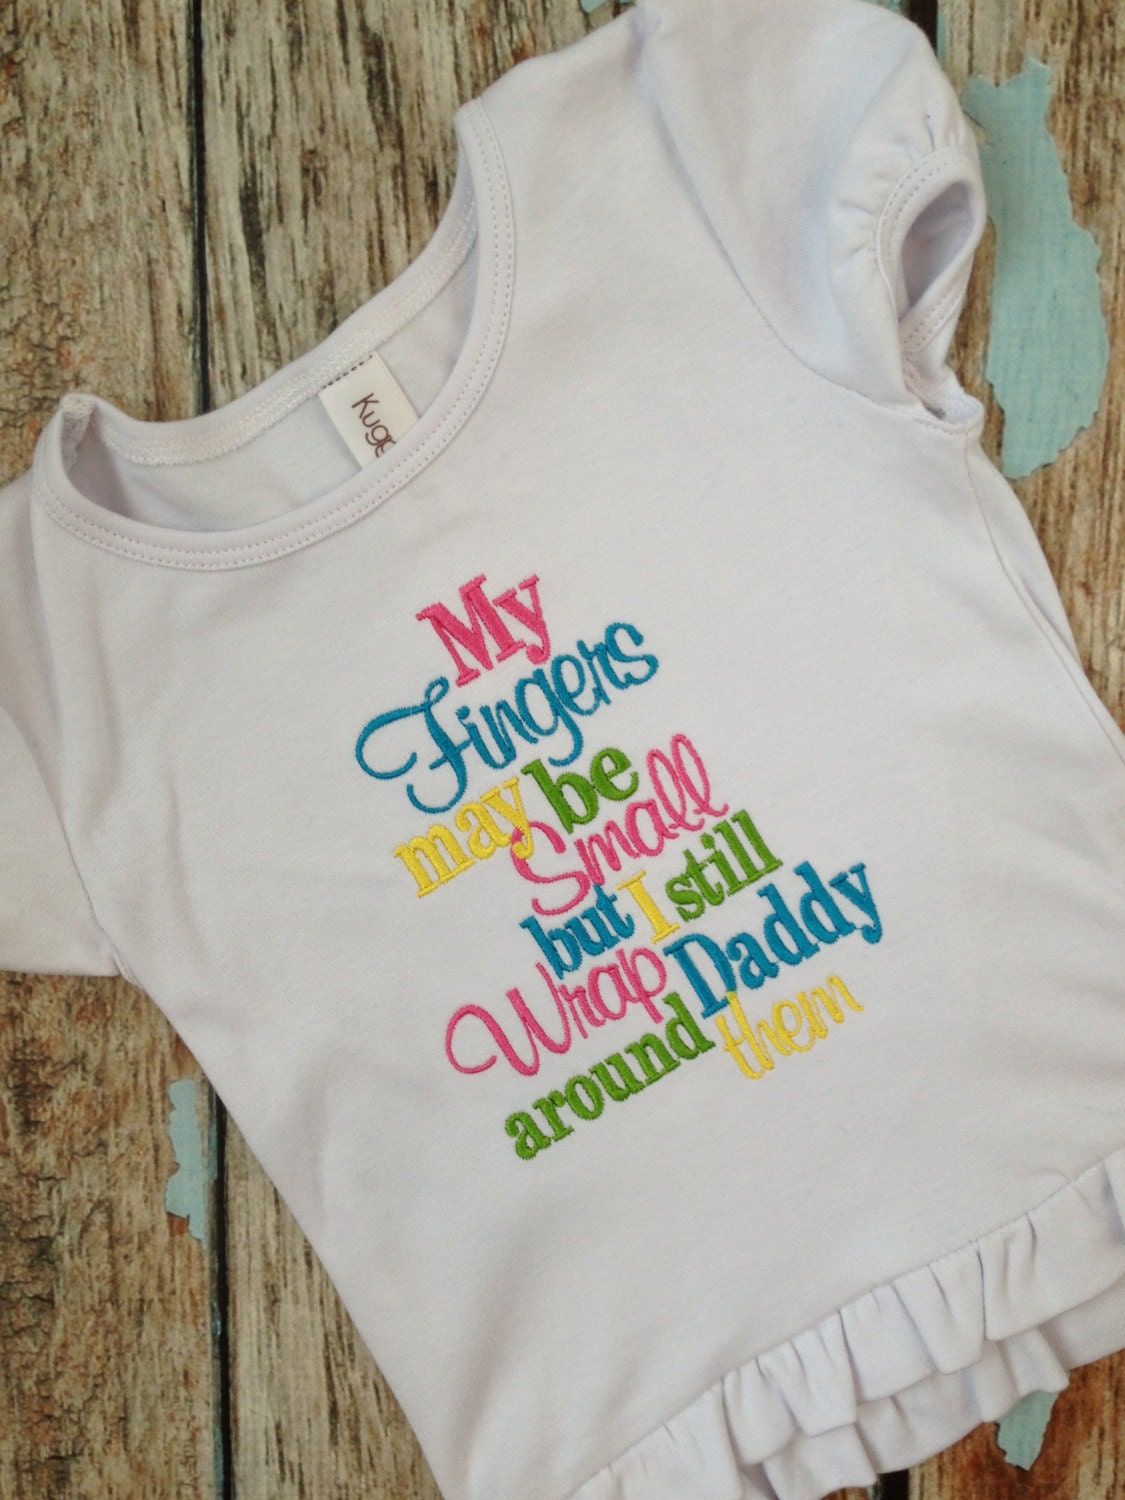 My Fingers May Be Small but I Still Wrap My Daddy Around Them - Etsy